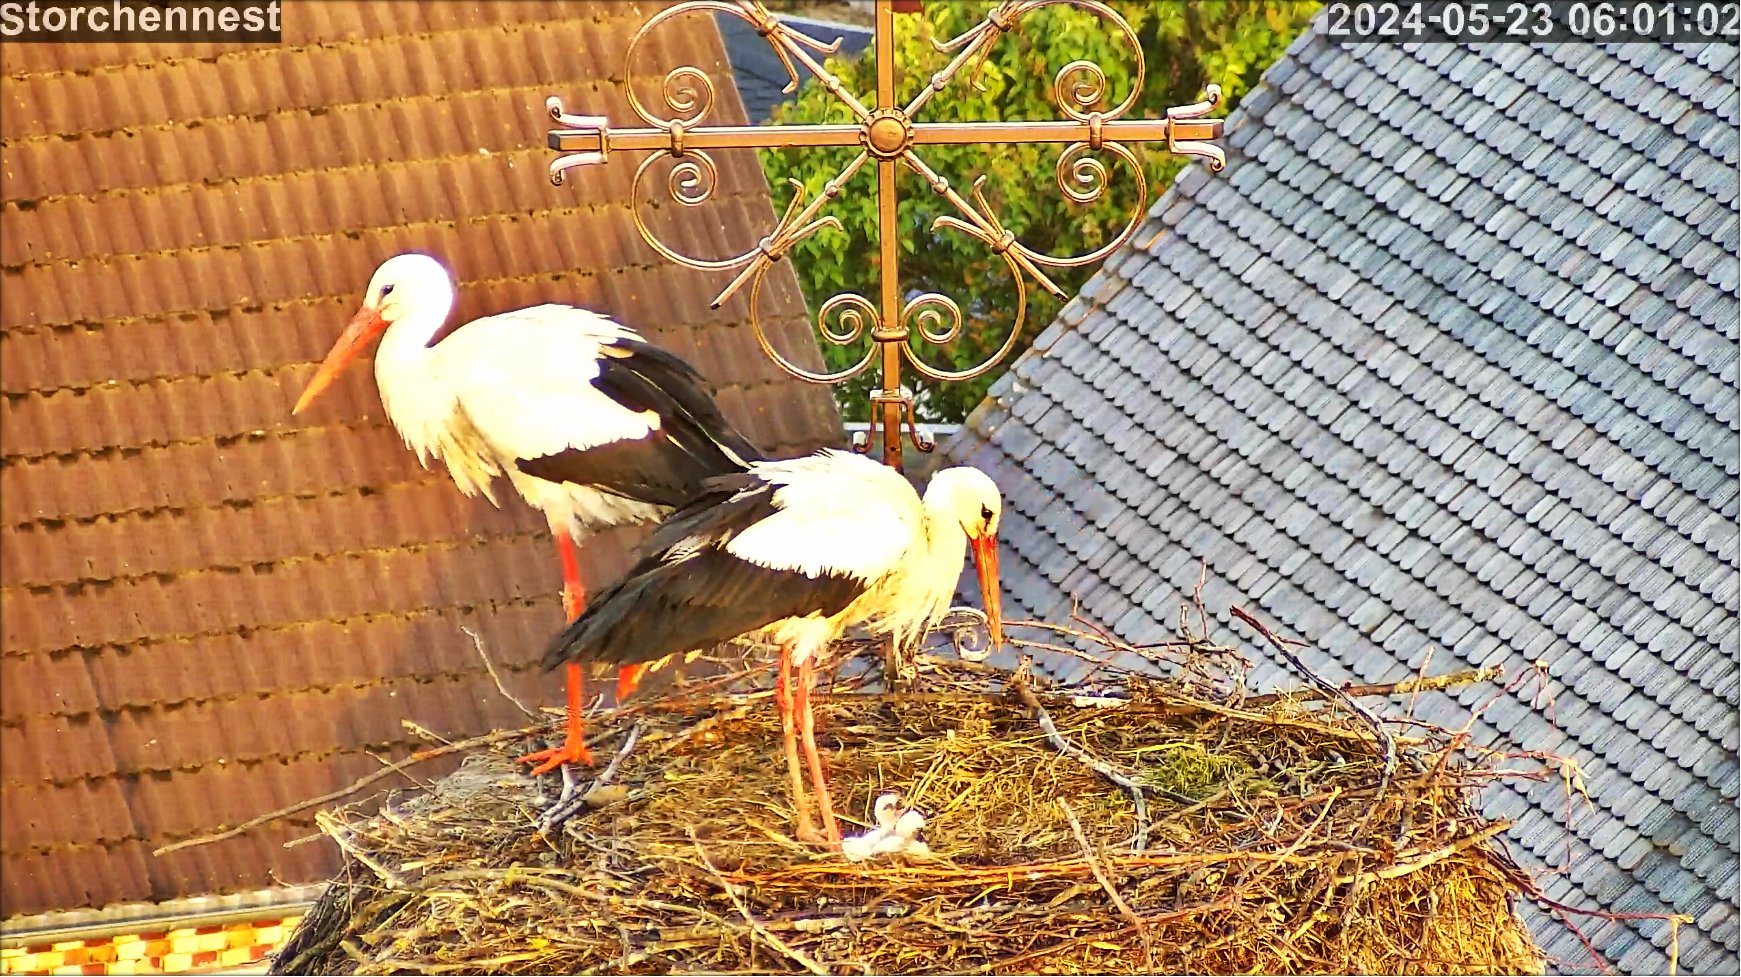 Storch Junges2